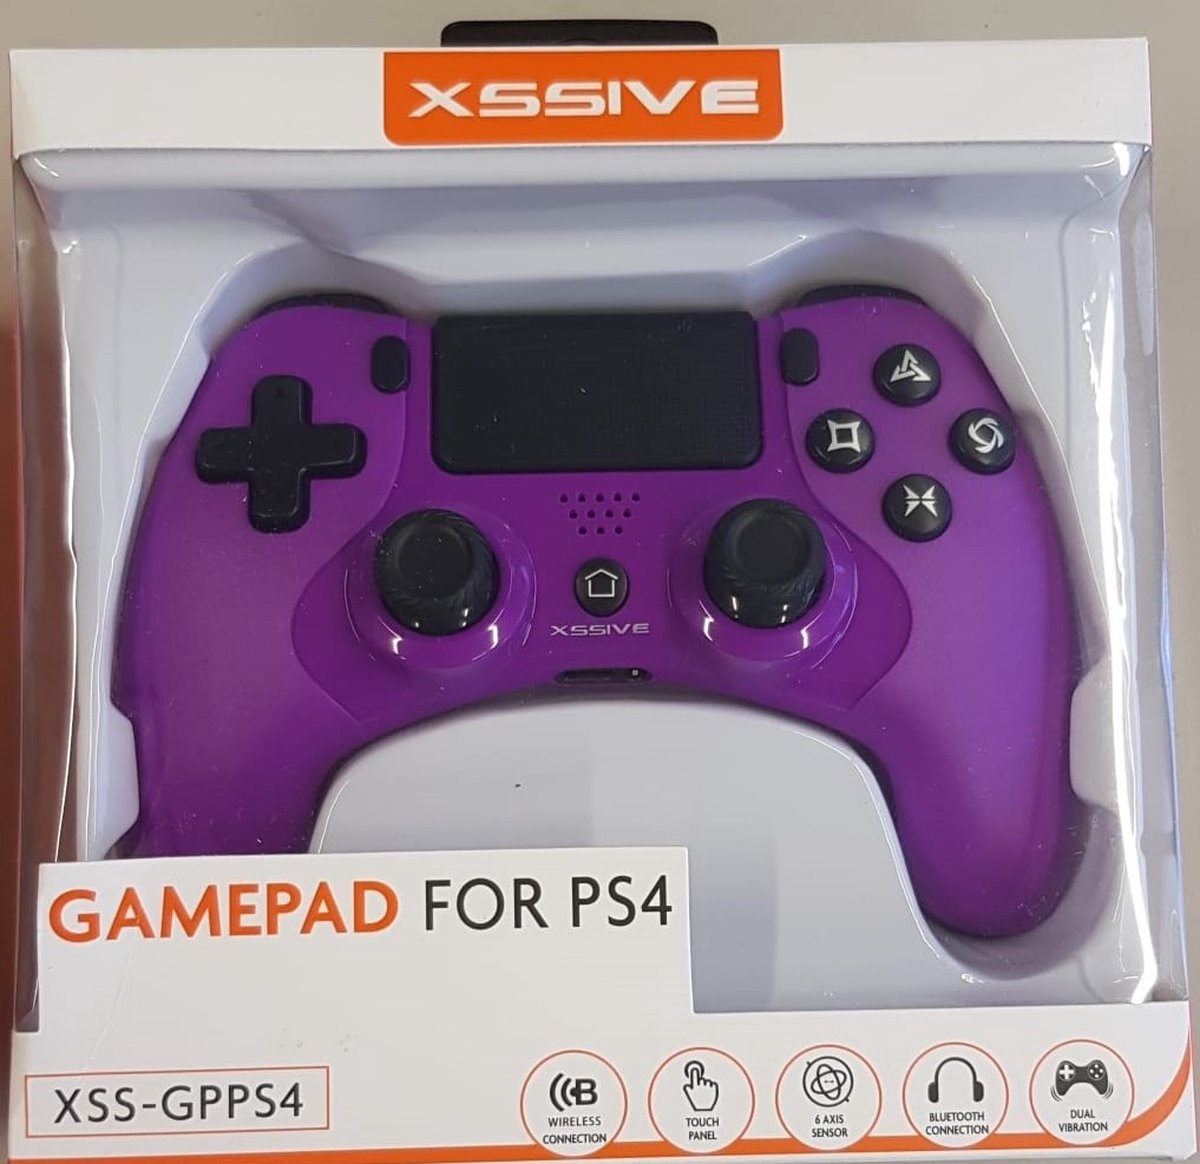 Xssive Game Pad for PS4 Pars (Purple) Colour XSS-GPPS4 Play Station Light Pars